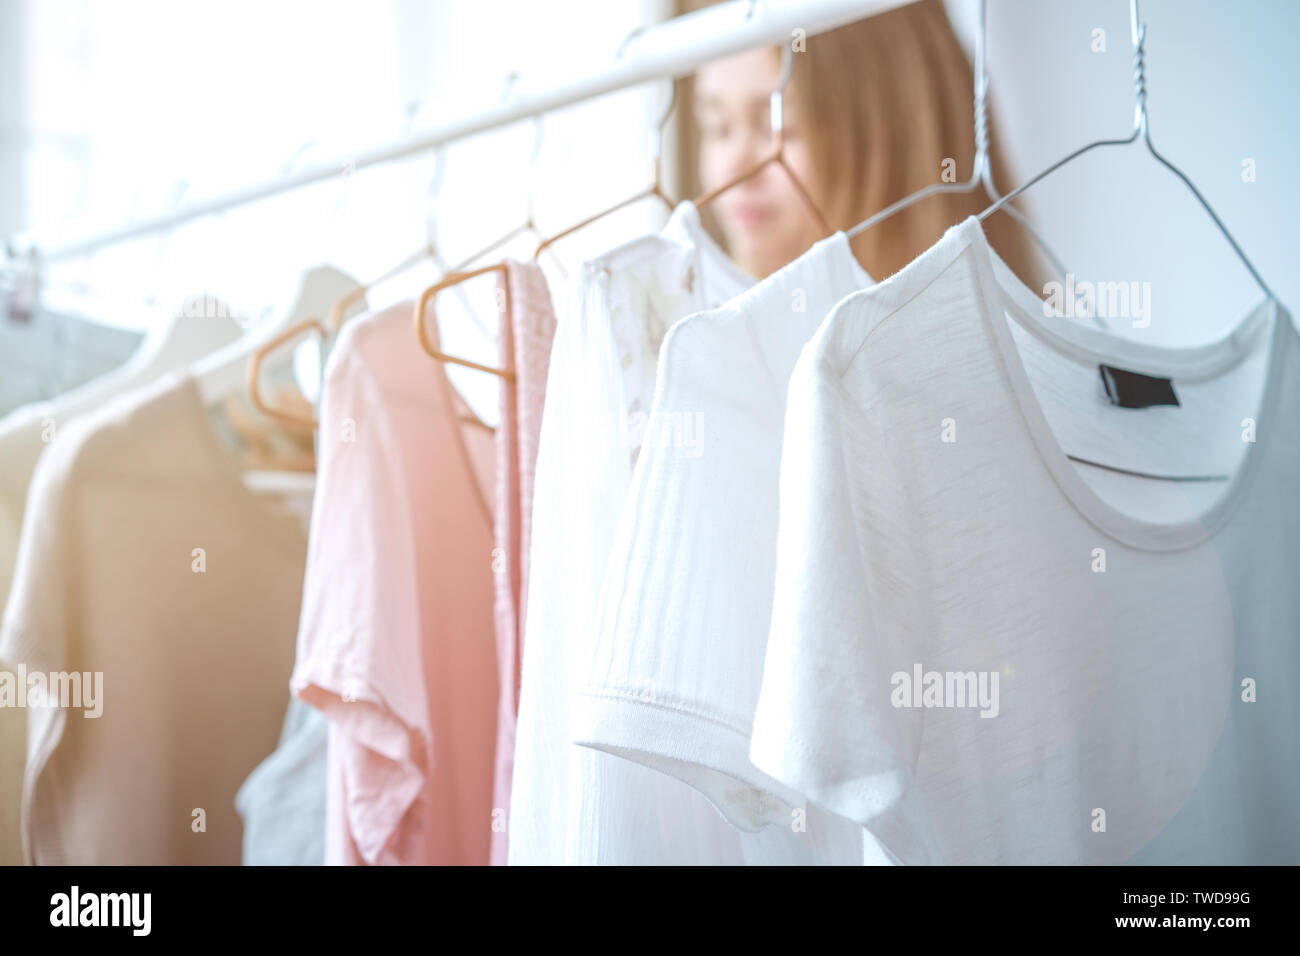 clothing, fashion, style and people concept - woman choosing clothes at home wardrobe Stock Photo